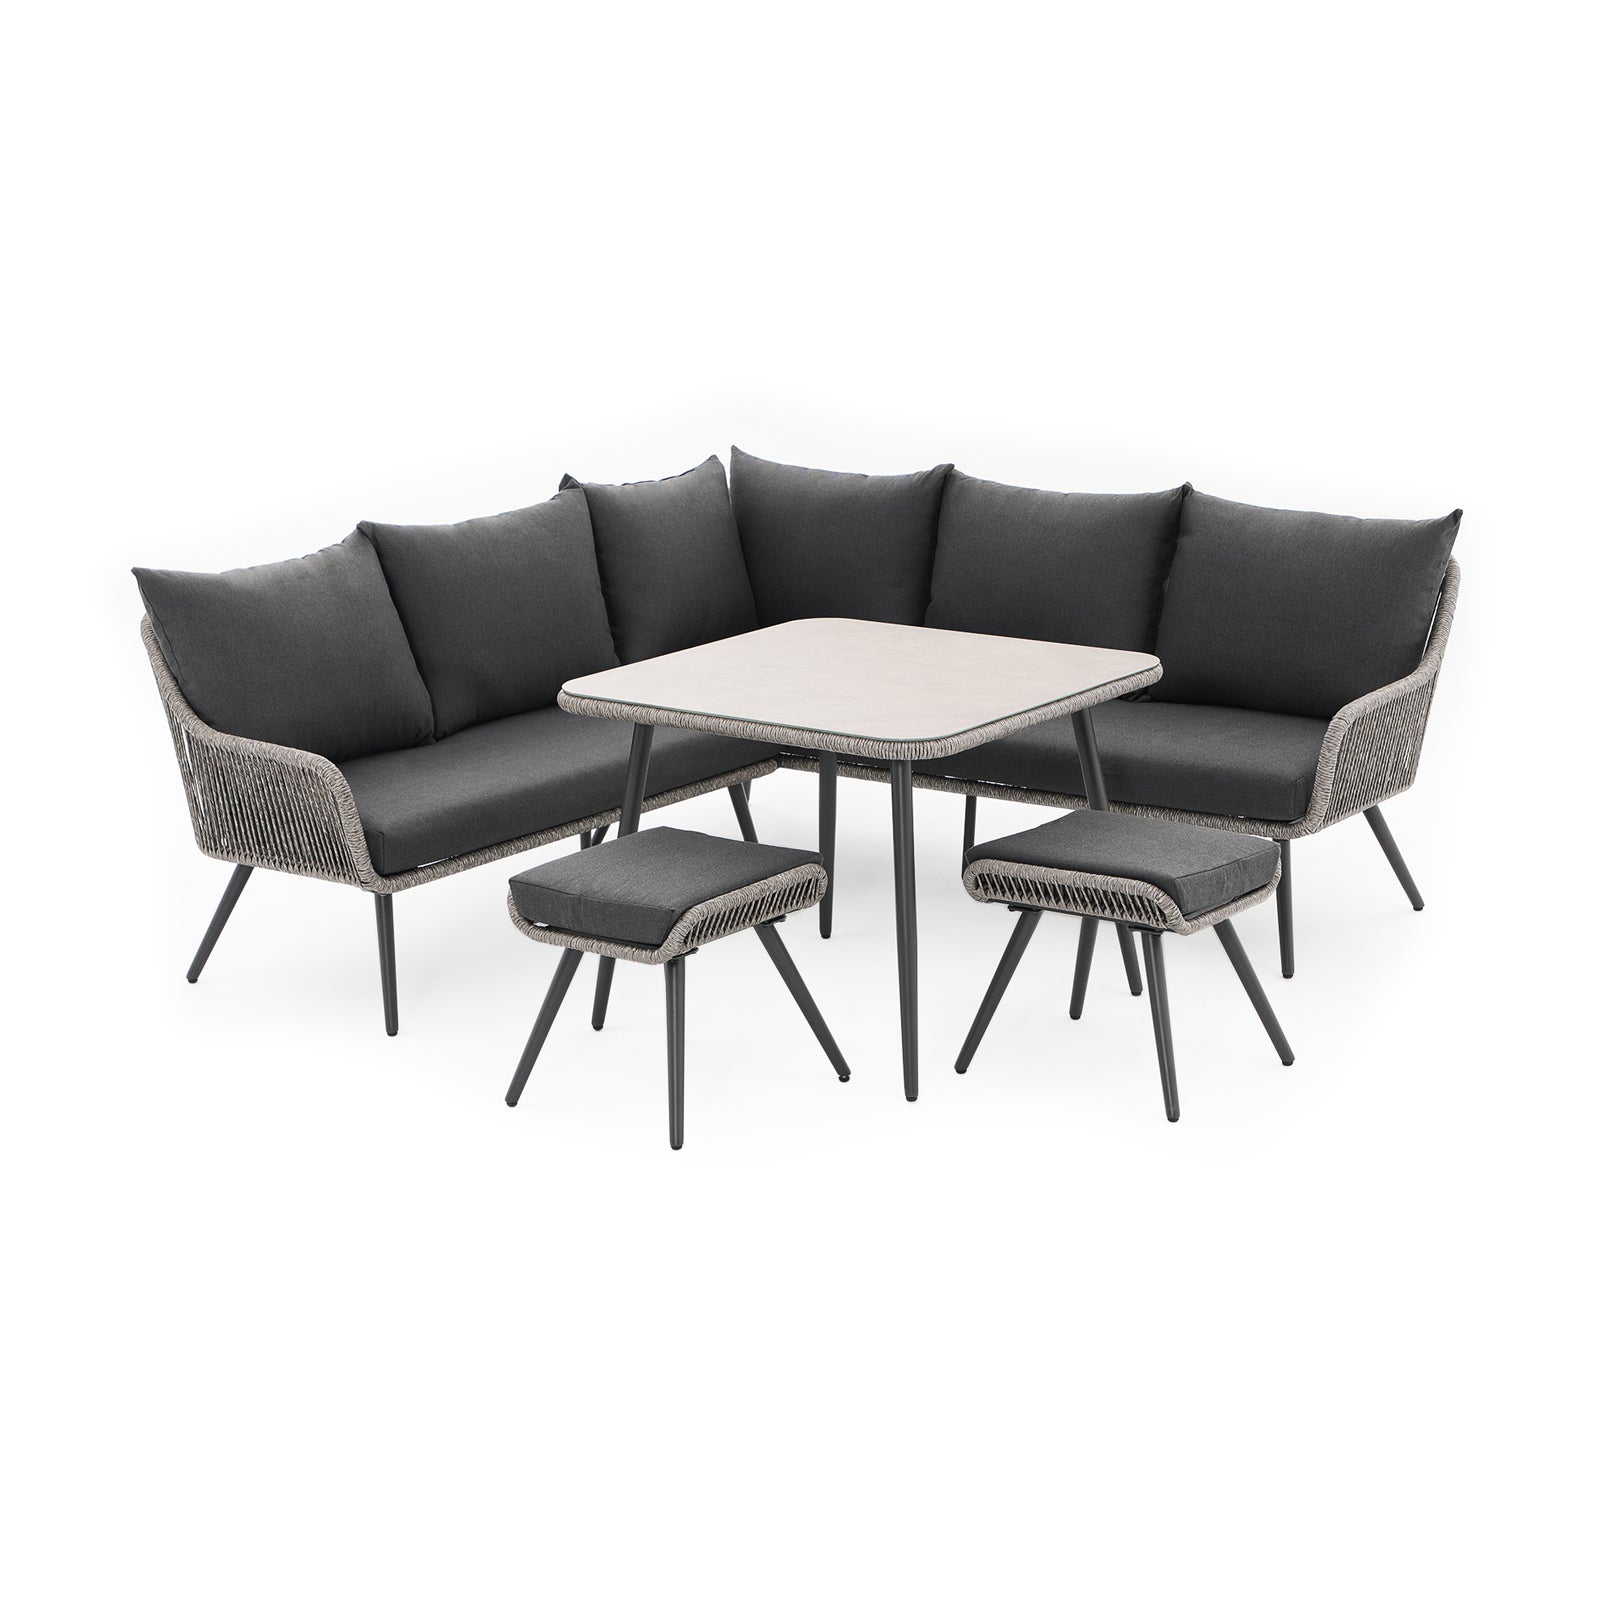 Hallerbos L-Shaped Outdoor Sectional Dining Set with steel frame, twisted rattan design, grey cushions, 1 square dining table, 5 seats sectional sofa, 2 ottomans - Jardina Furniture#Color_Grey